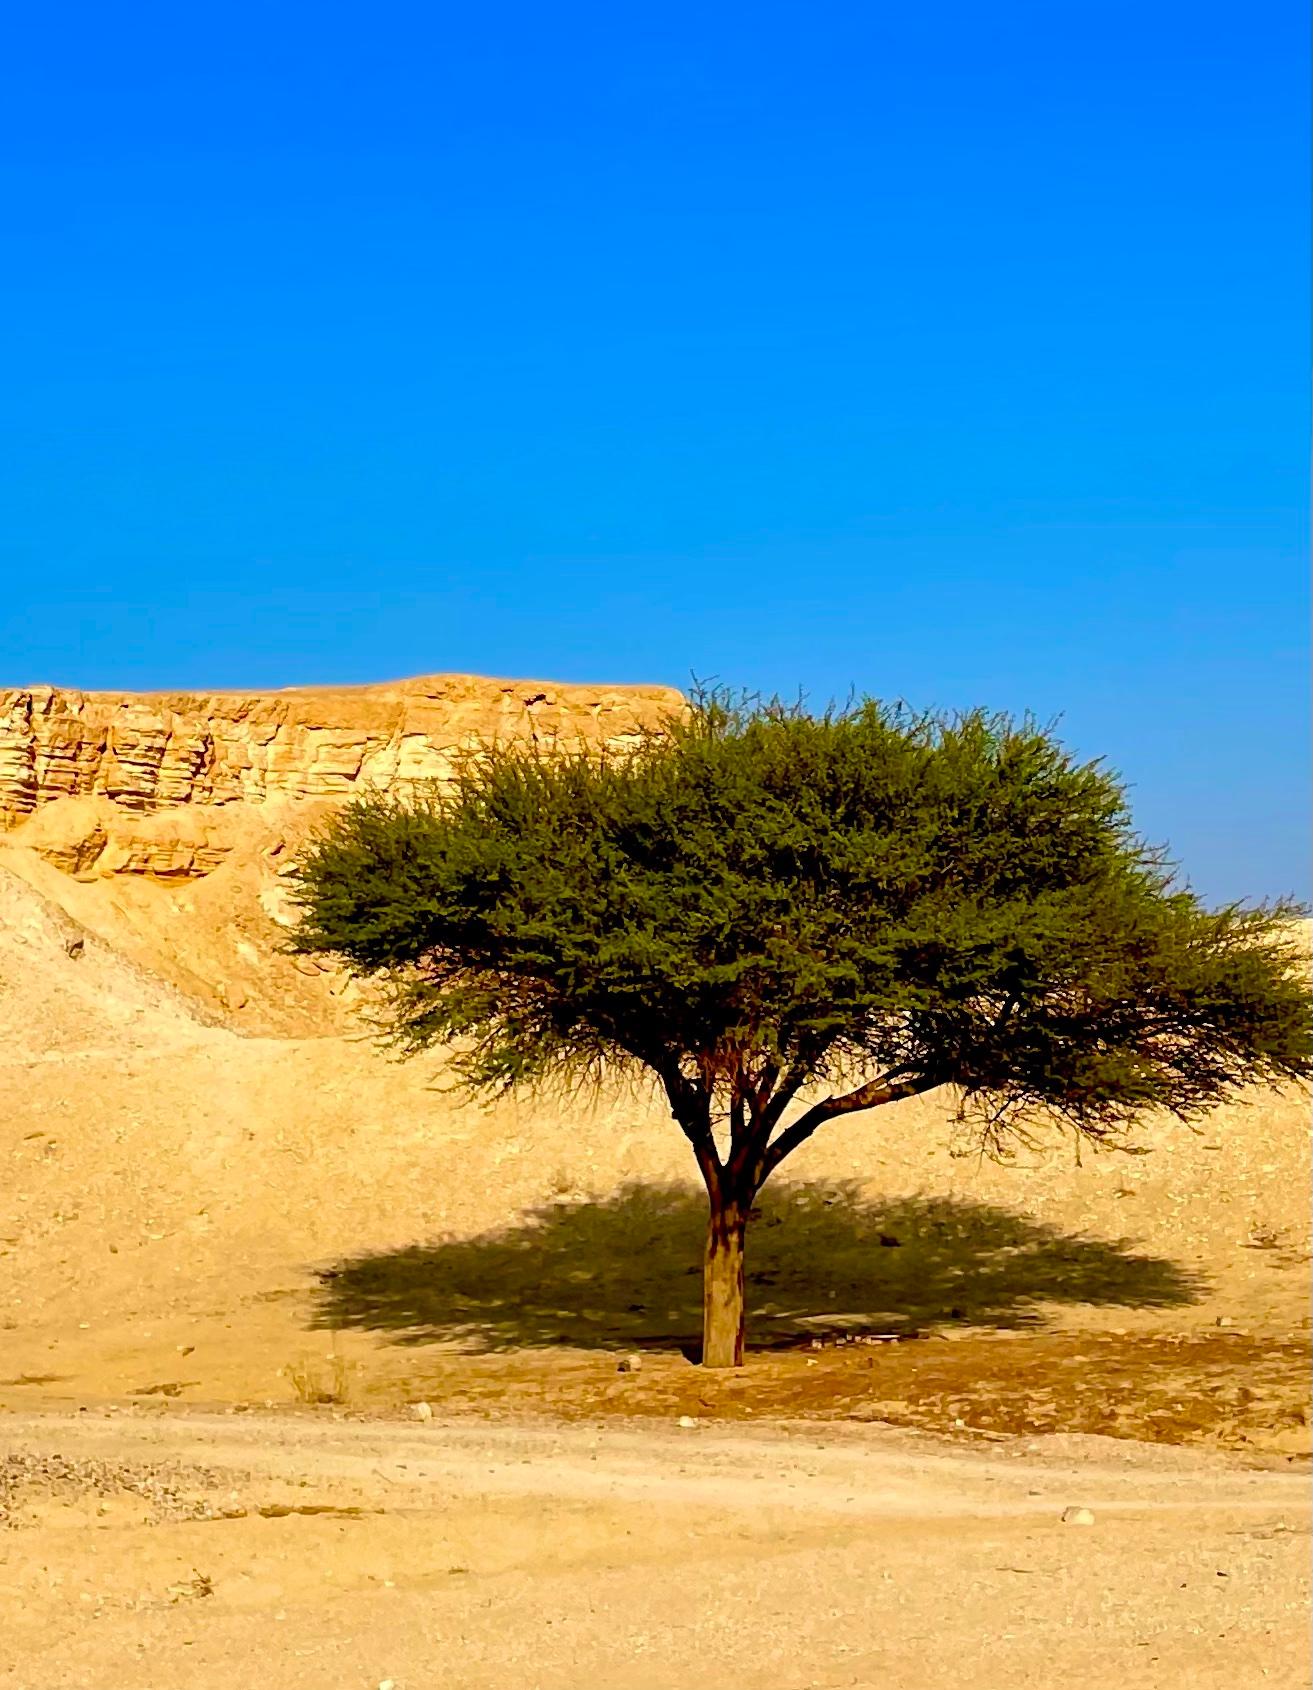 This beautiful color photography was taken in Negev desert in Israel.
The title Shita refers to the tree name in Hebrew (Thorntree in English)
Roy Dagan is known for his mesmerizing landscape photos.
This desert view of the the Negev desert in